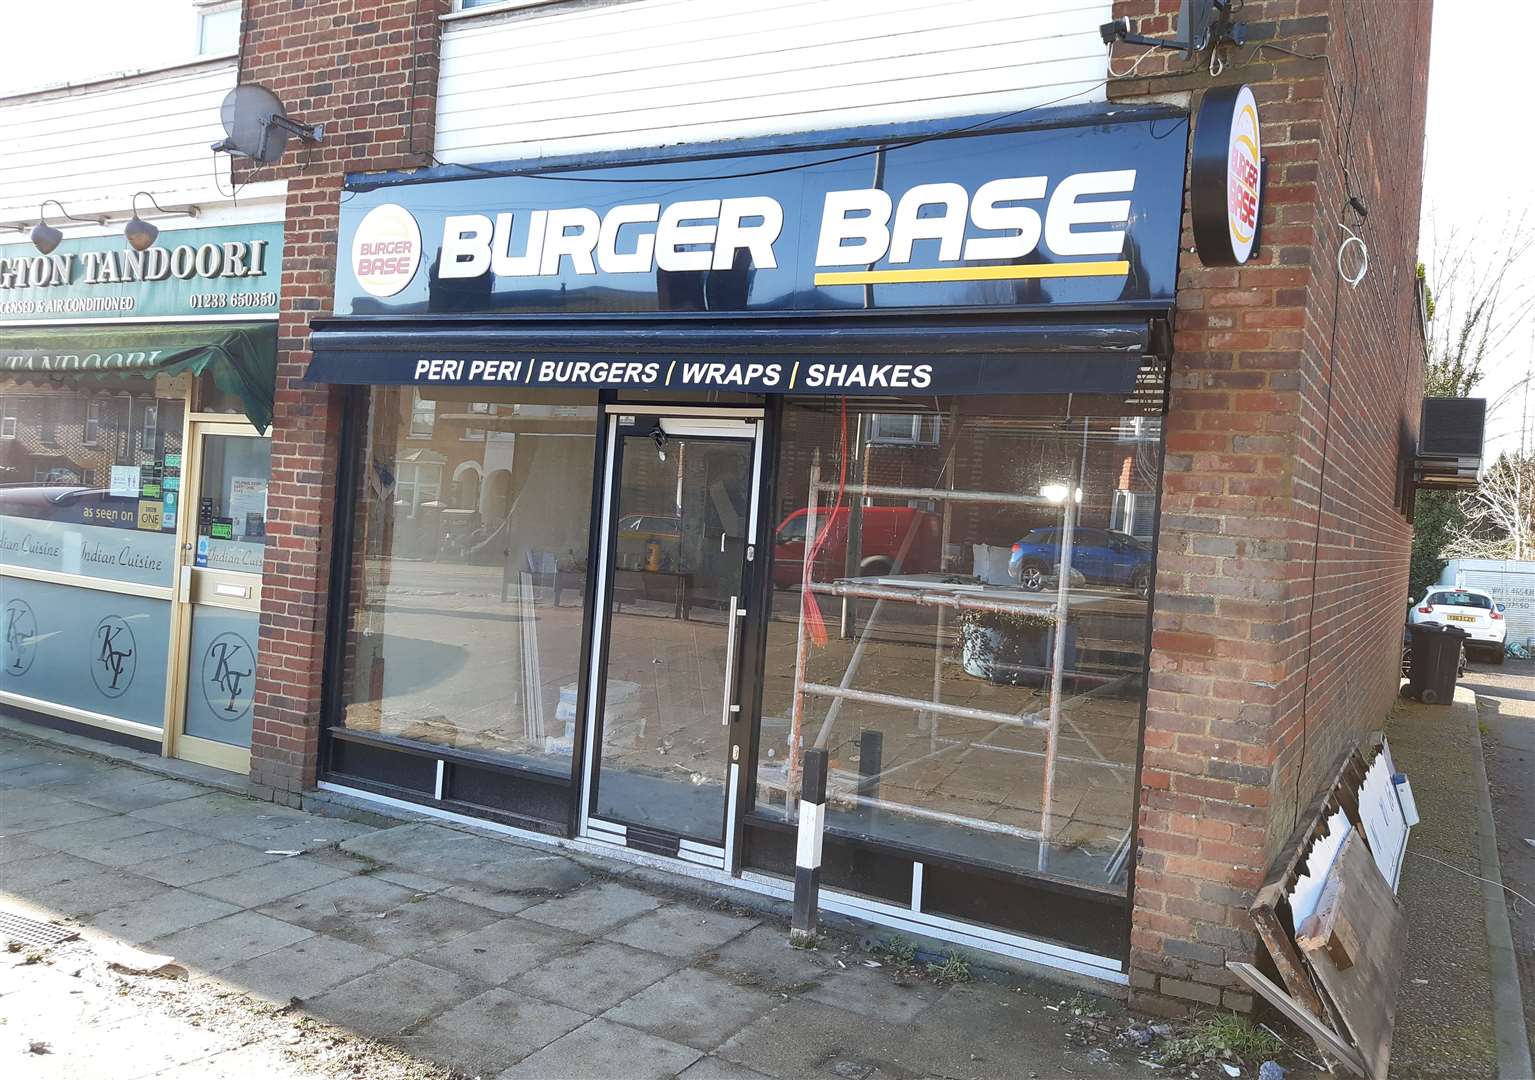 Burger Base is being outfitted ahead of its opening post-lockdown